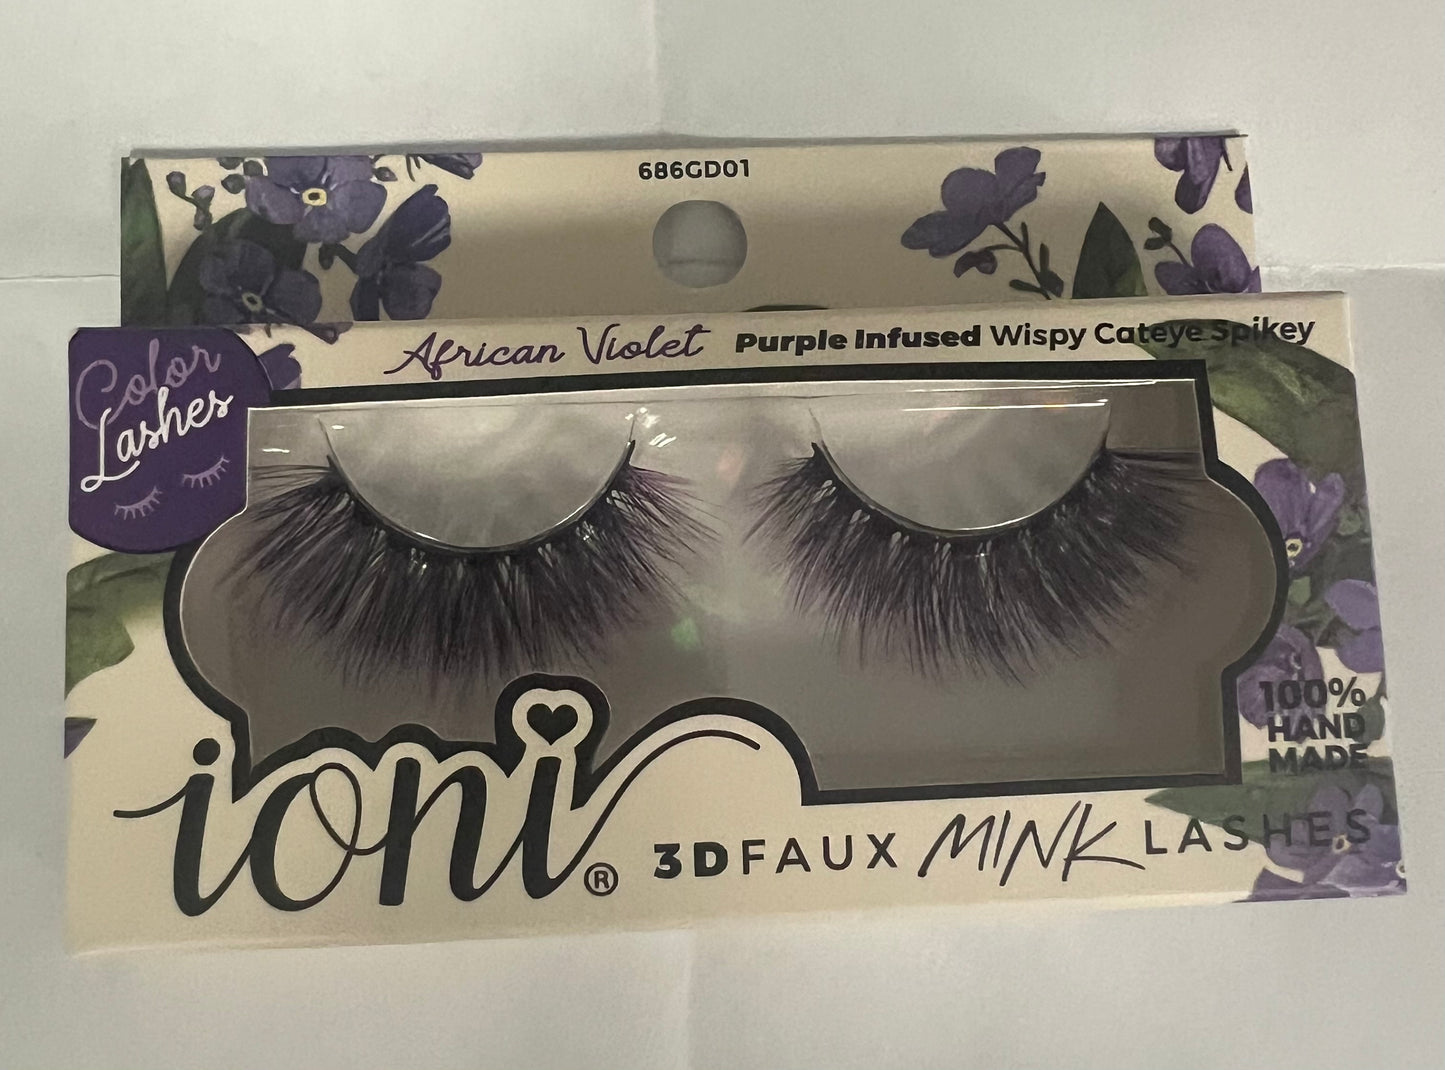 African Violet Purple Infused Mink Lashes